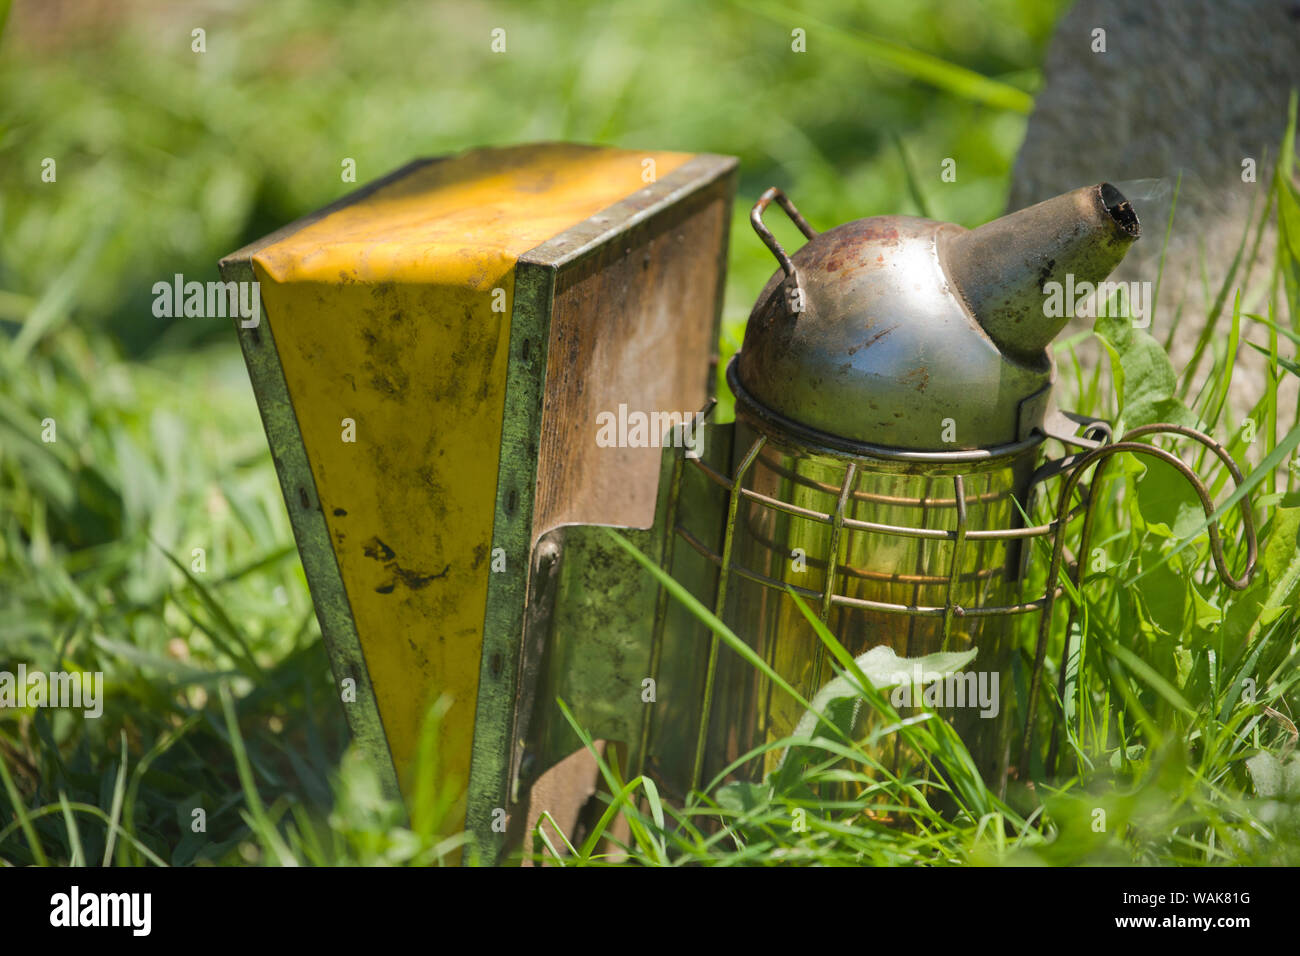 Seattle, Washington State, USA. Bee smoker resting on the grass, puffing smoke, ready to be used to distract bees in a hive. Stock Photo